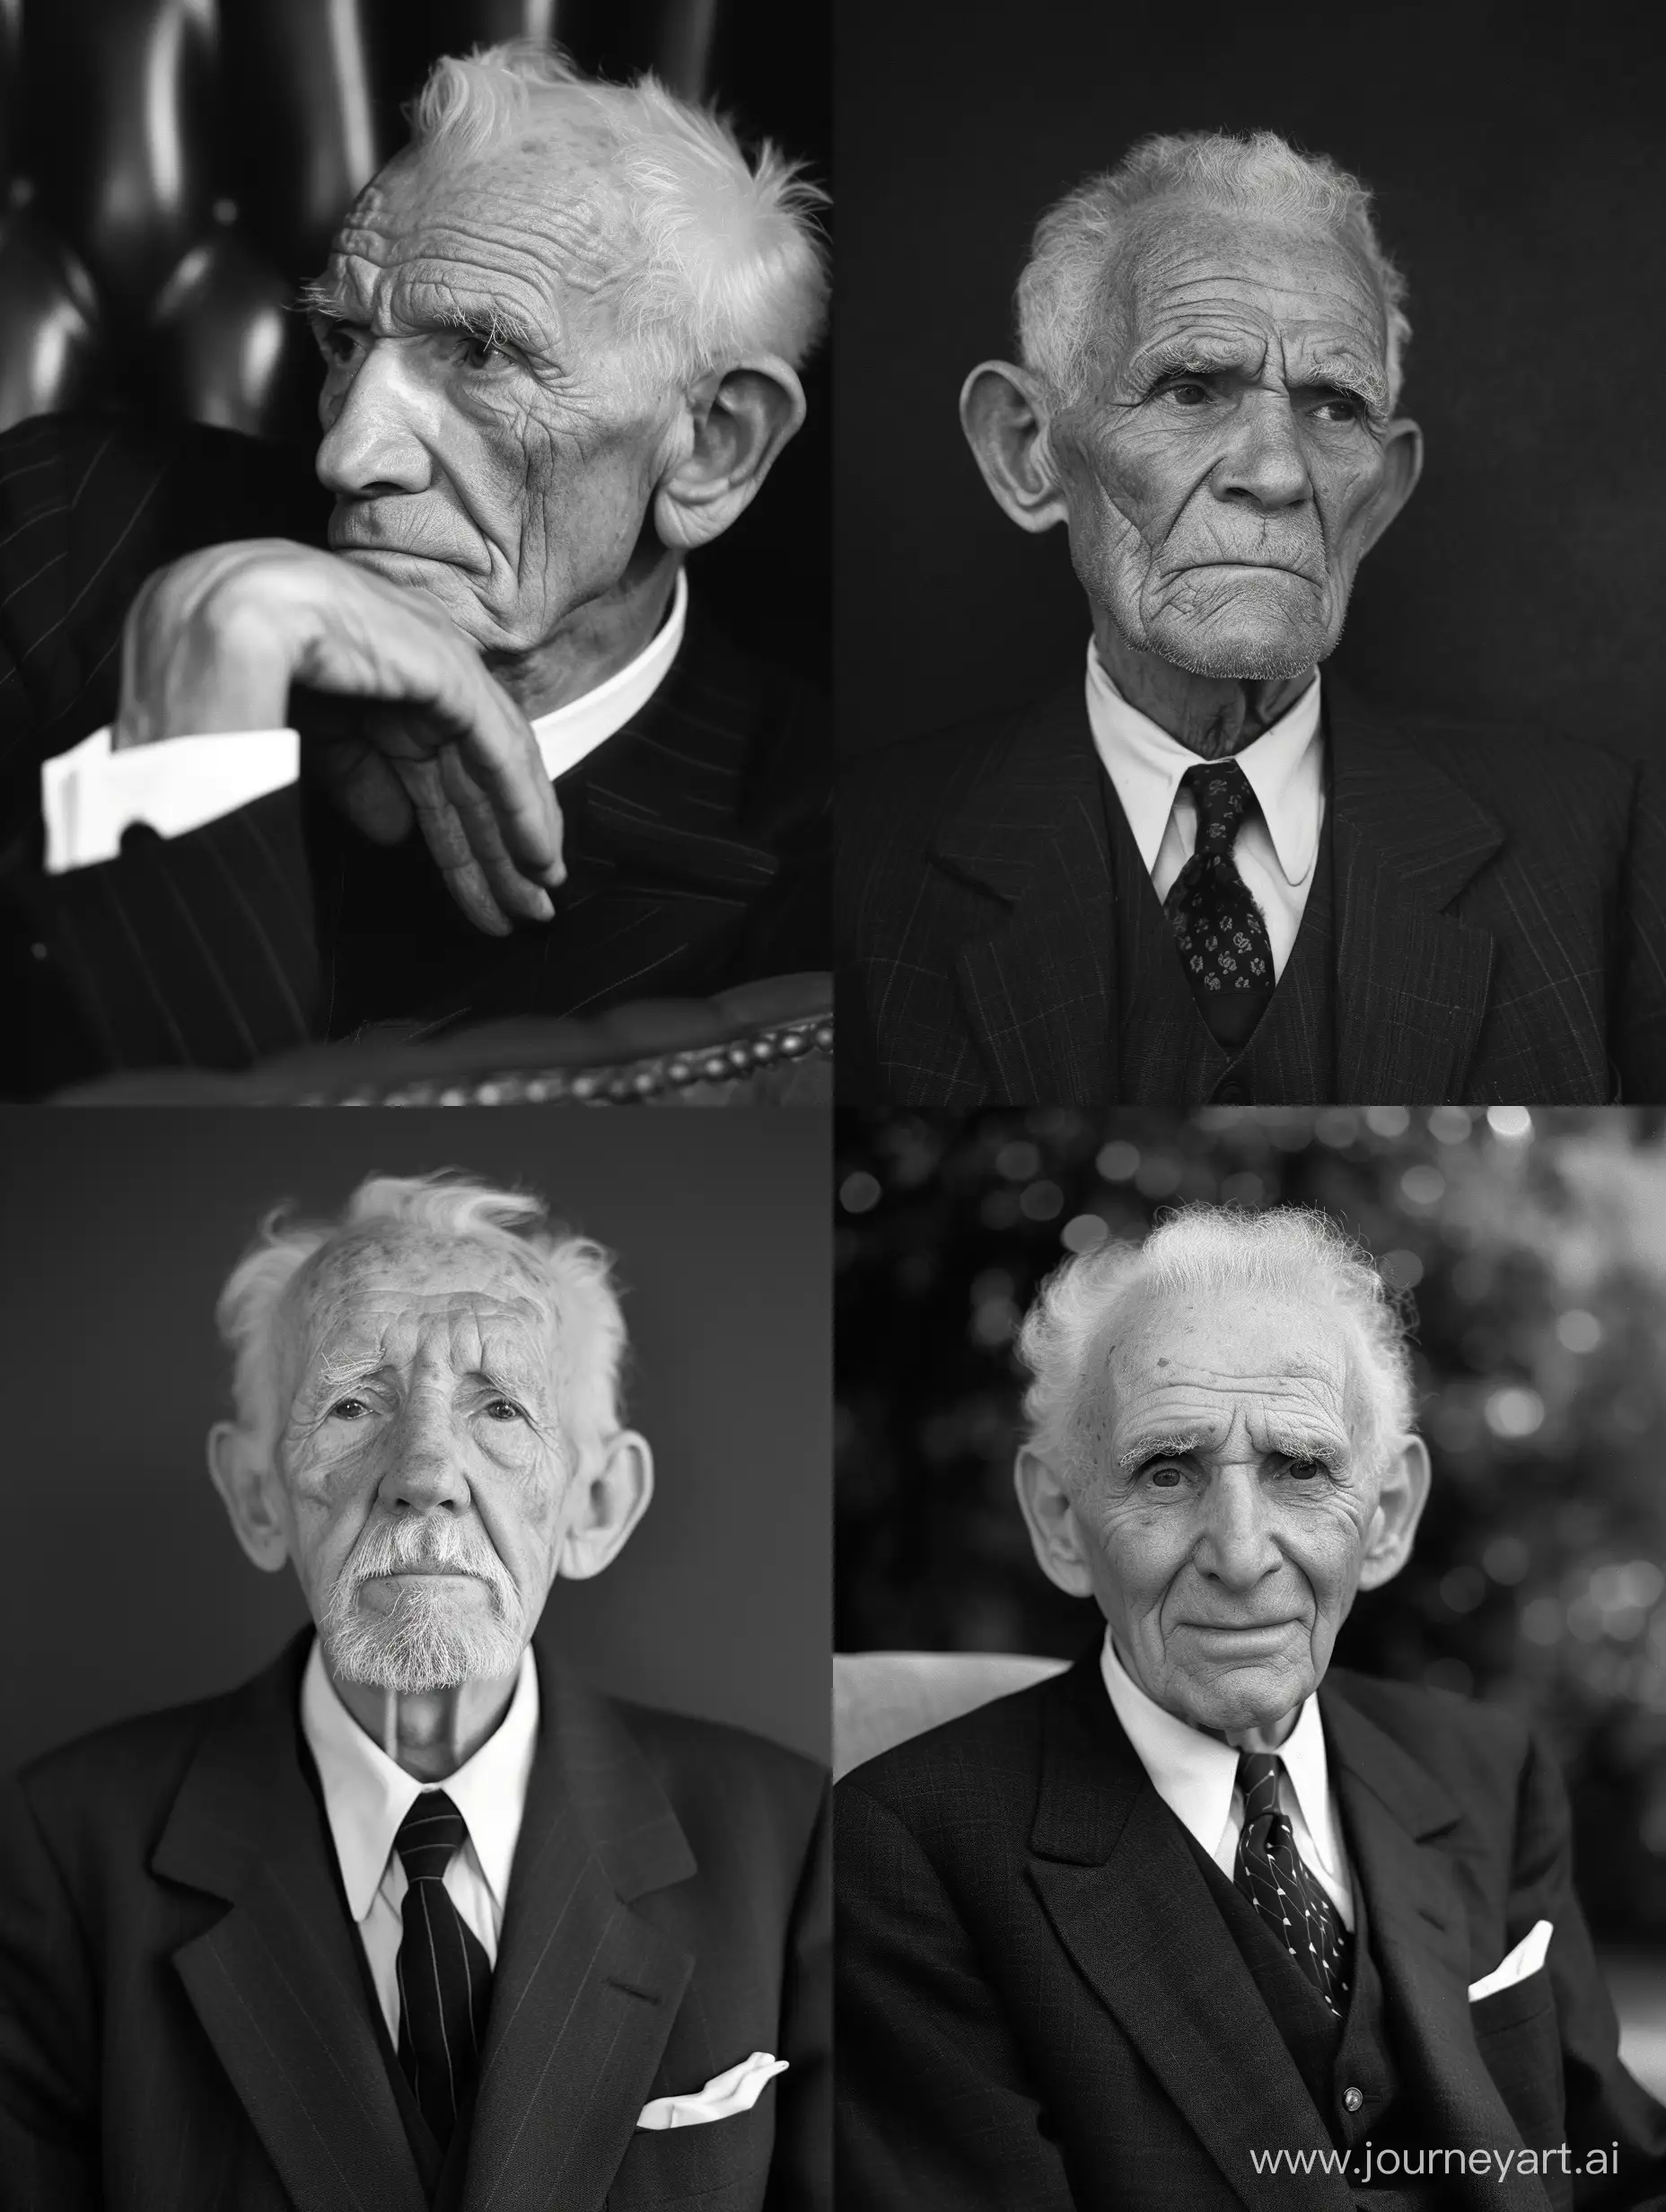 old man wearing formal suit, formal realistic photography in black and white from the 1950s